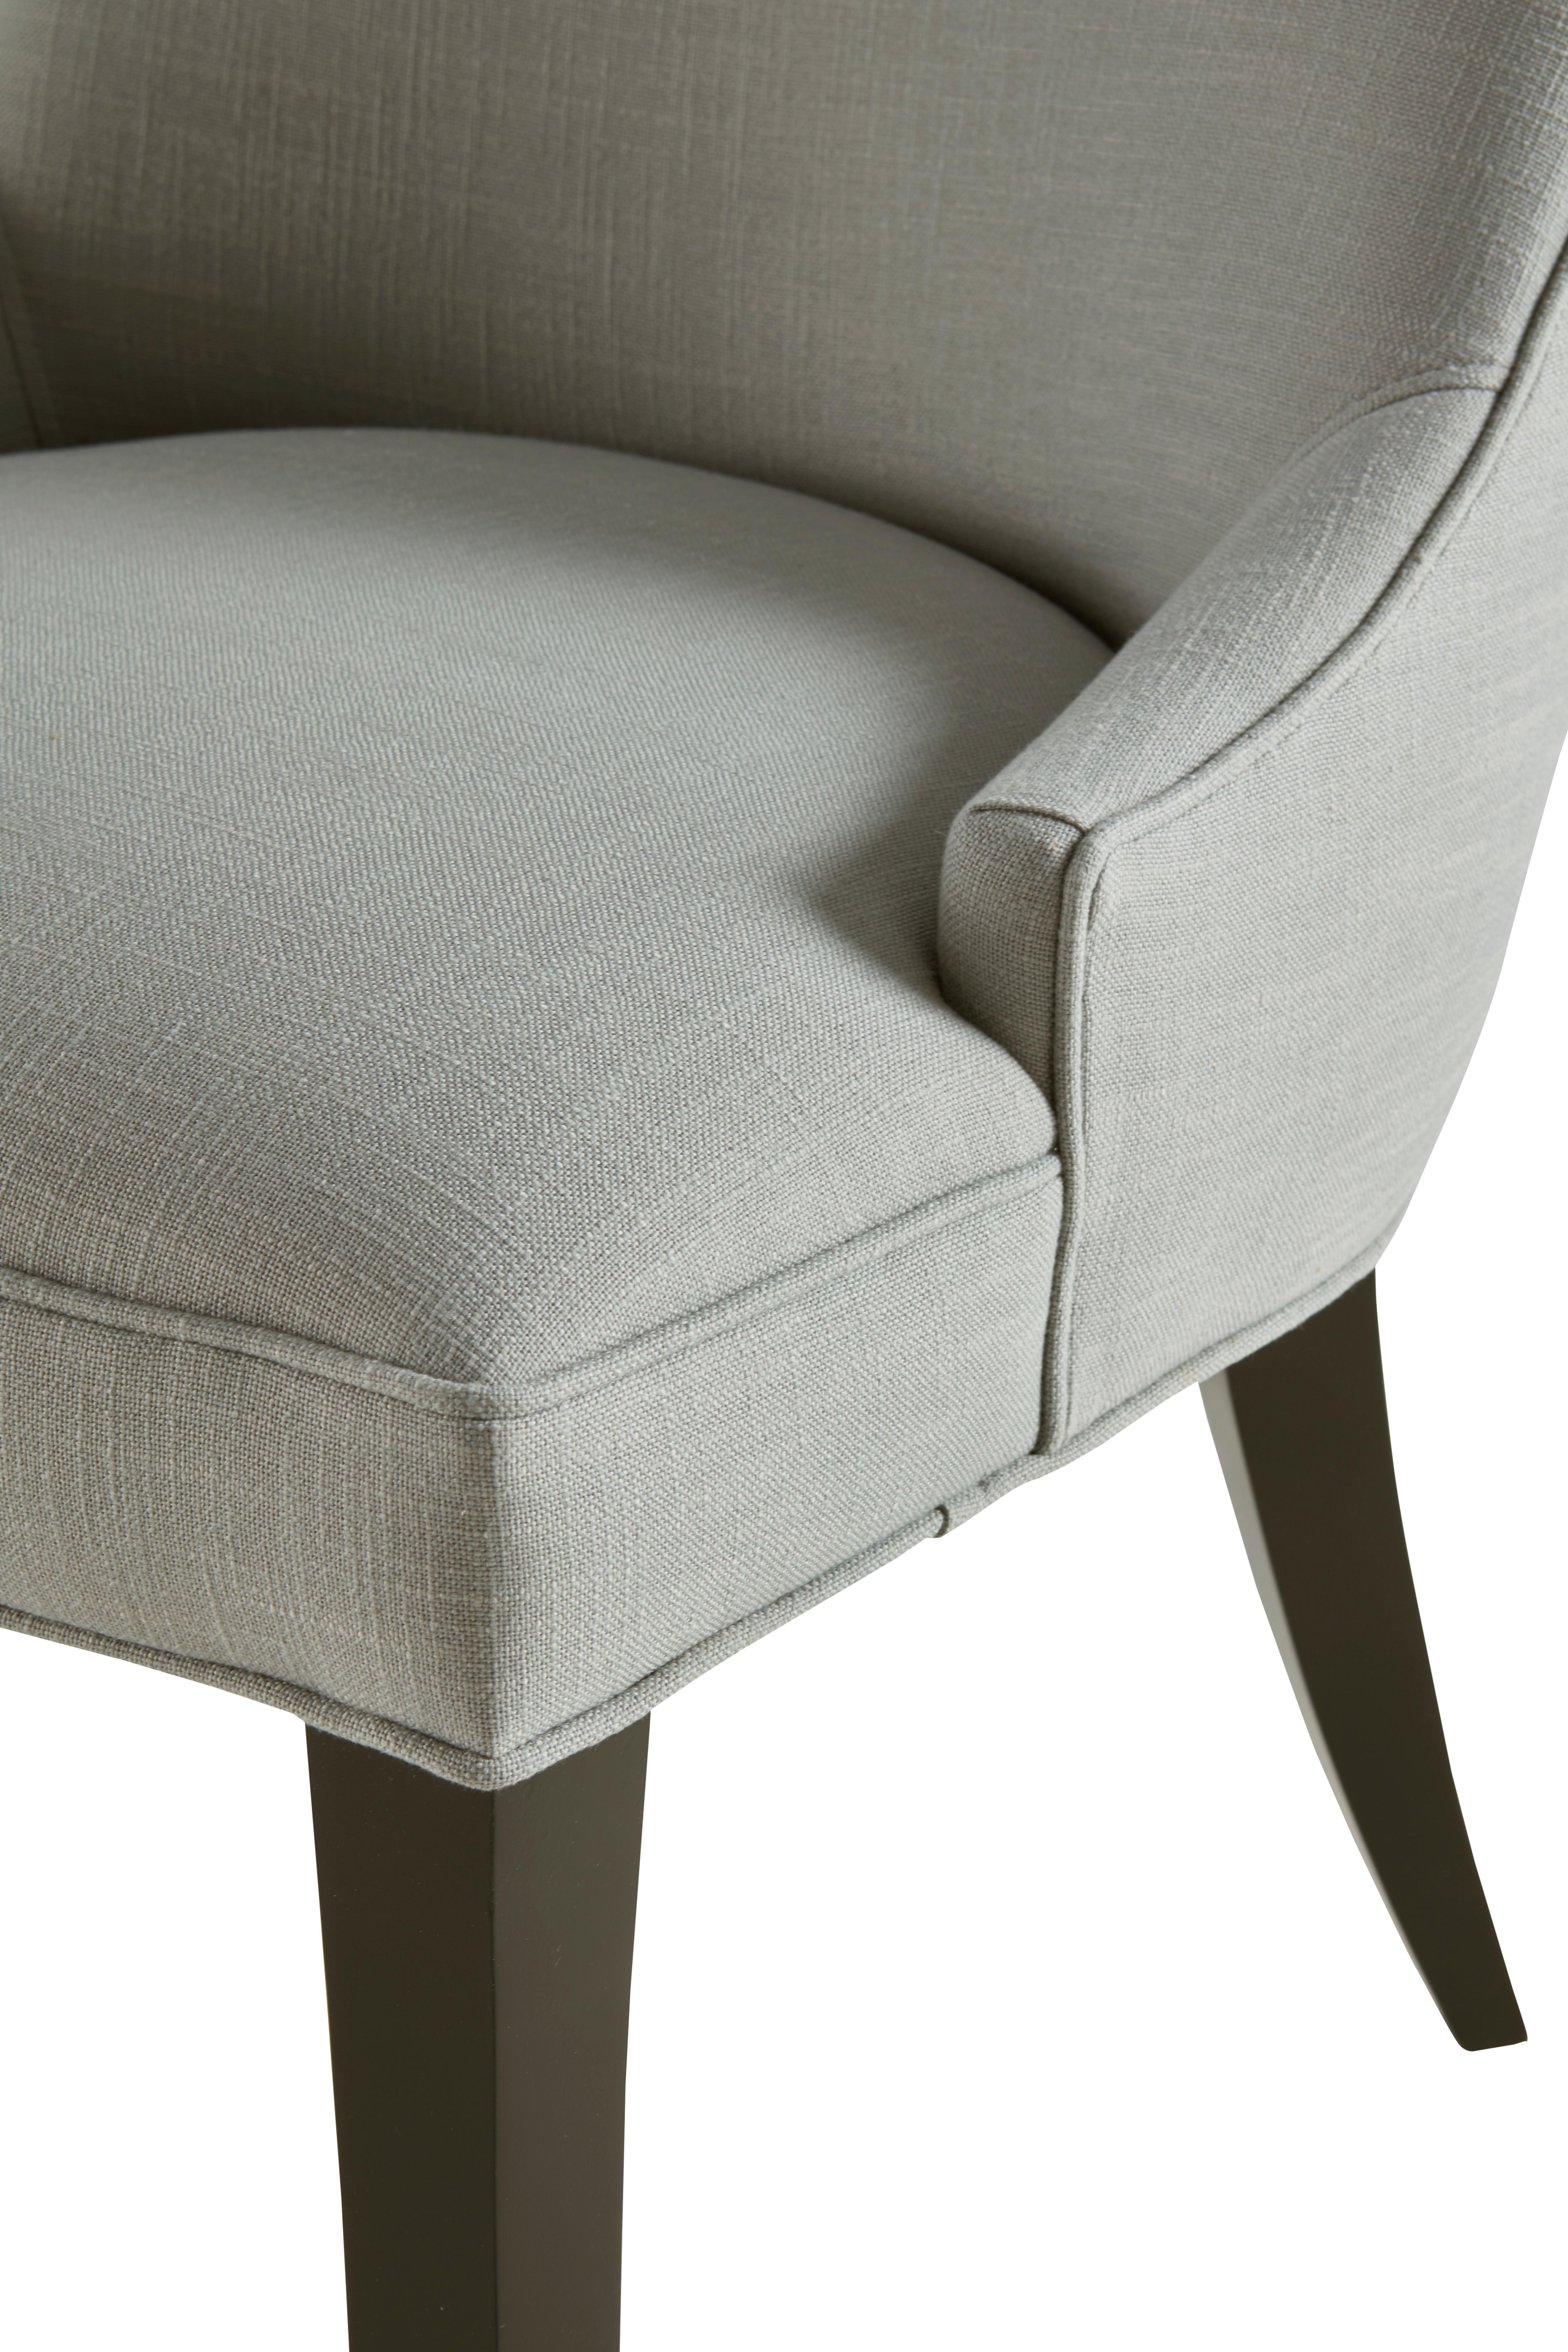 American Canterbury Chair in Gray and Black by CuratedKravet